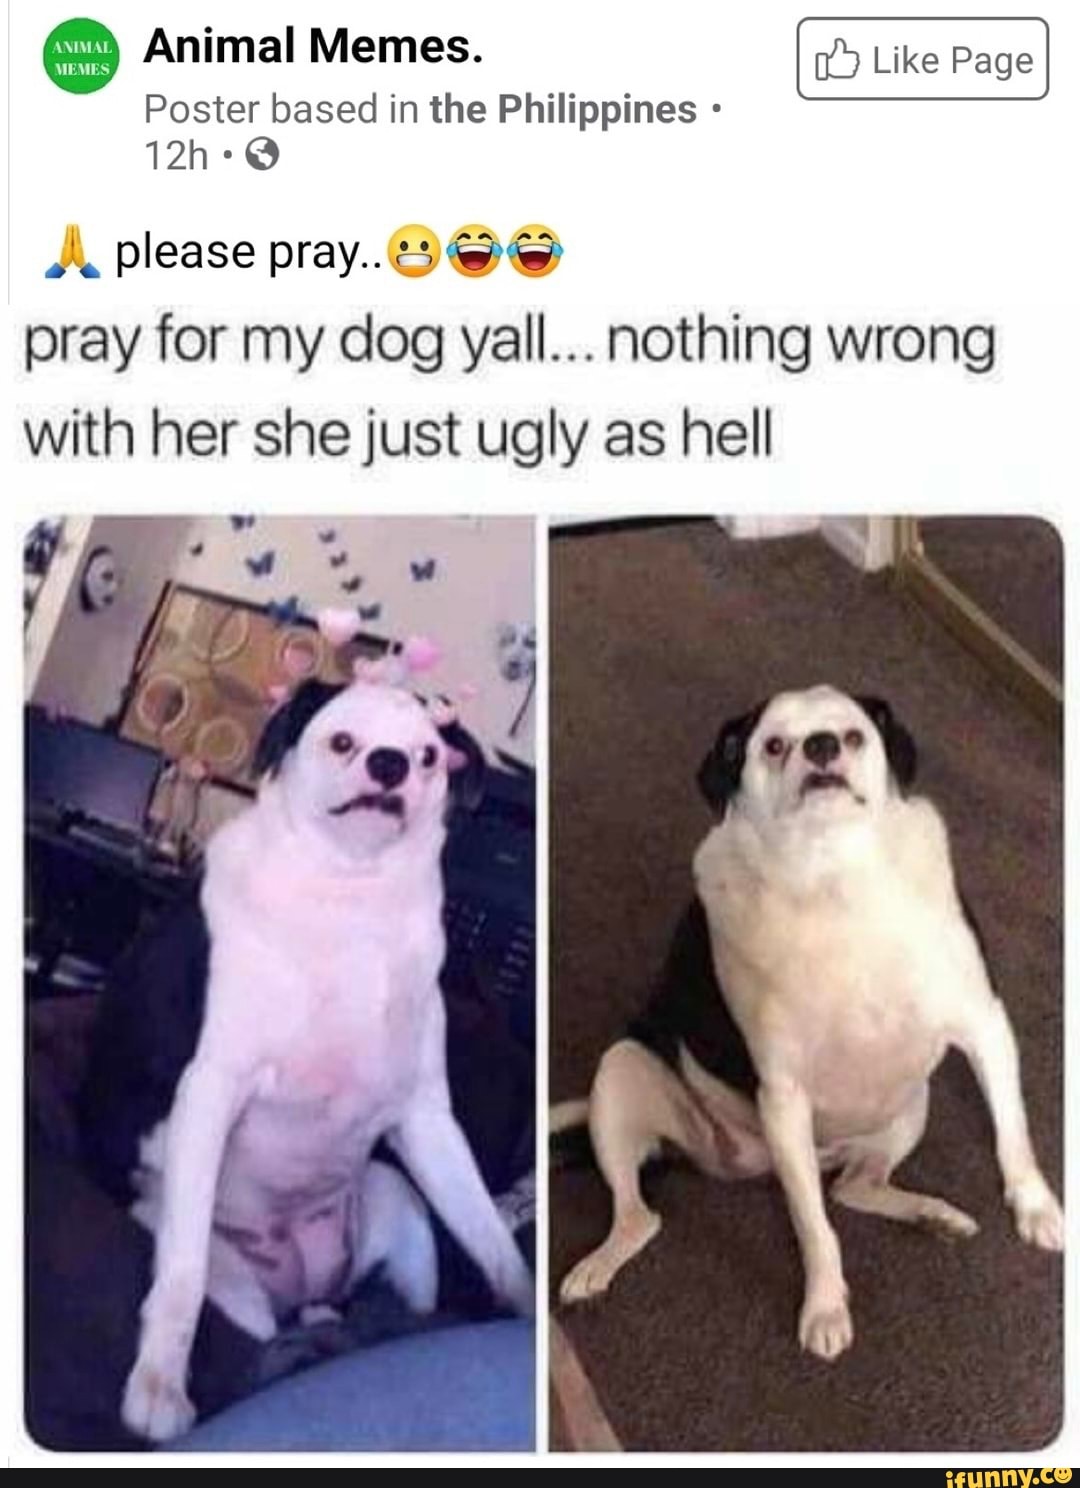 Animal Memes. Like Page Poster based in the Philippines - please pray.  @@@H) pray for my dog yall... nothing wrong with her she just ugly as hell  